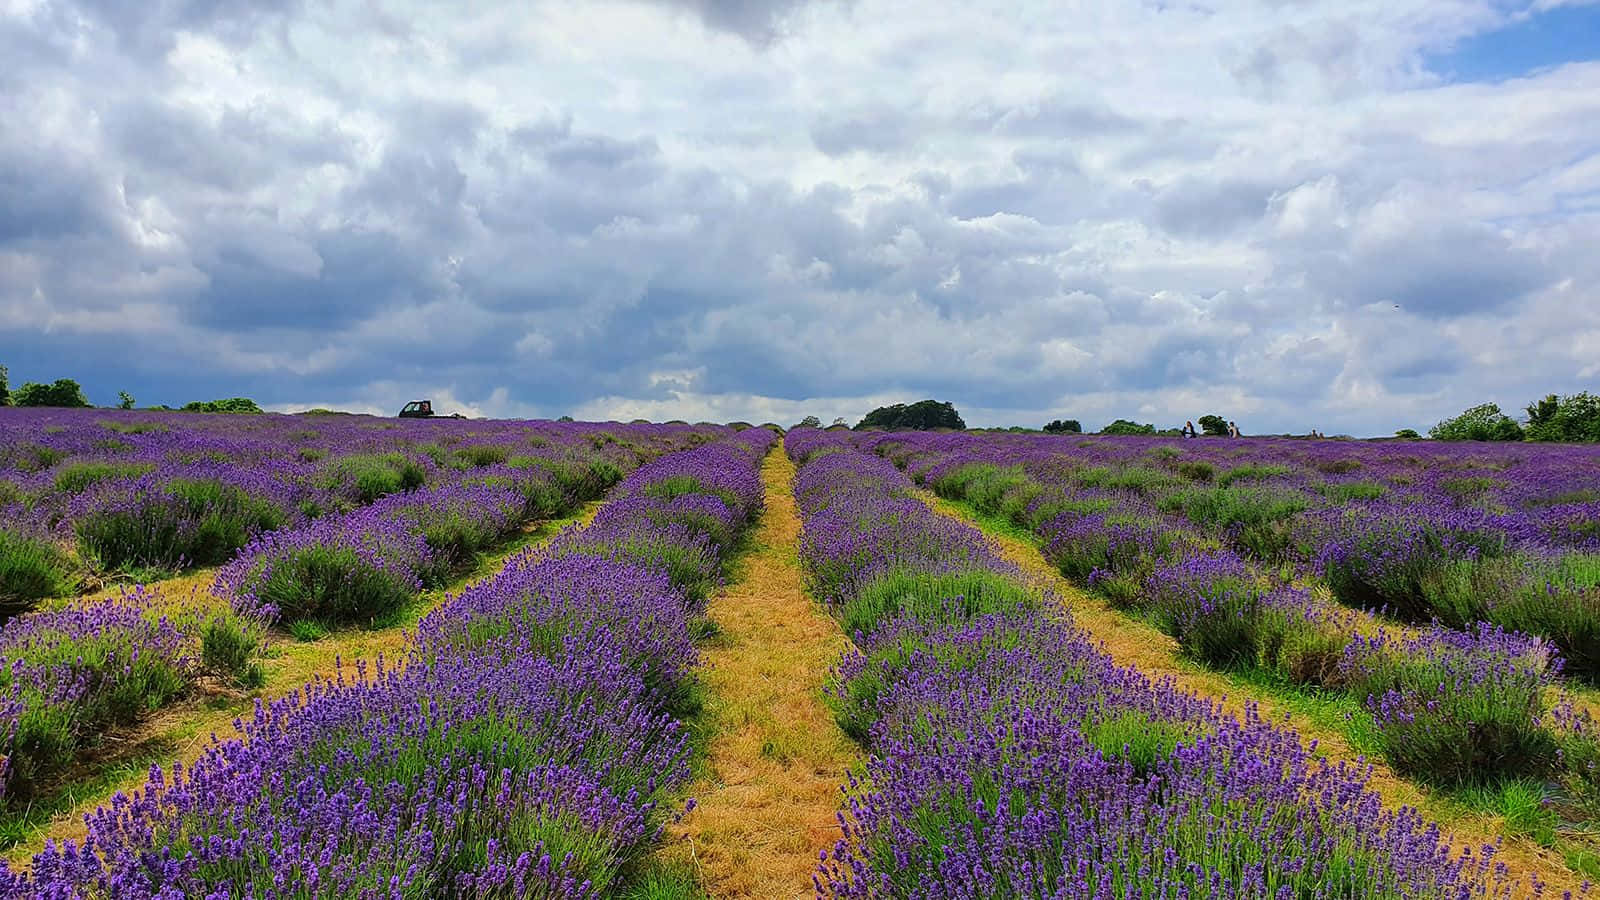 Enjoy the beauty of a lush lavender field